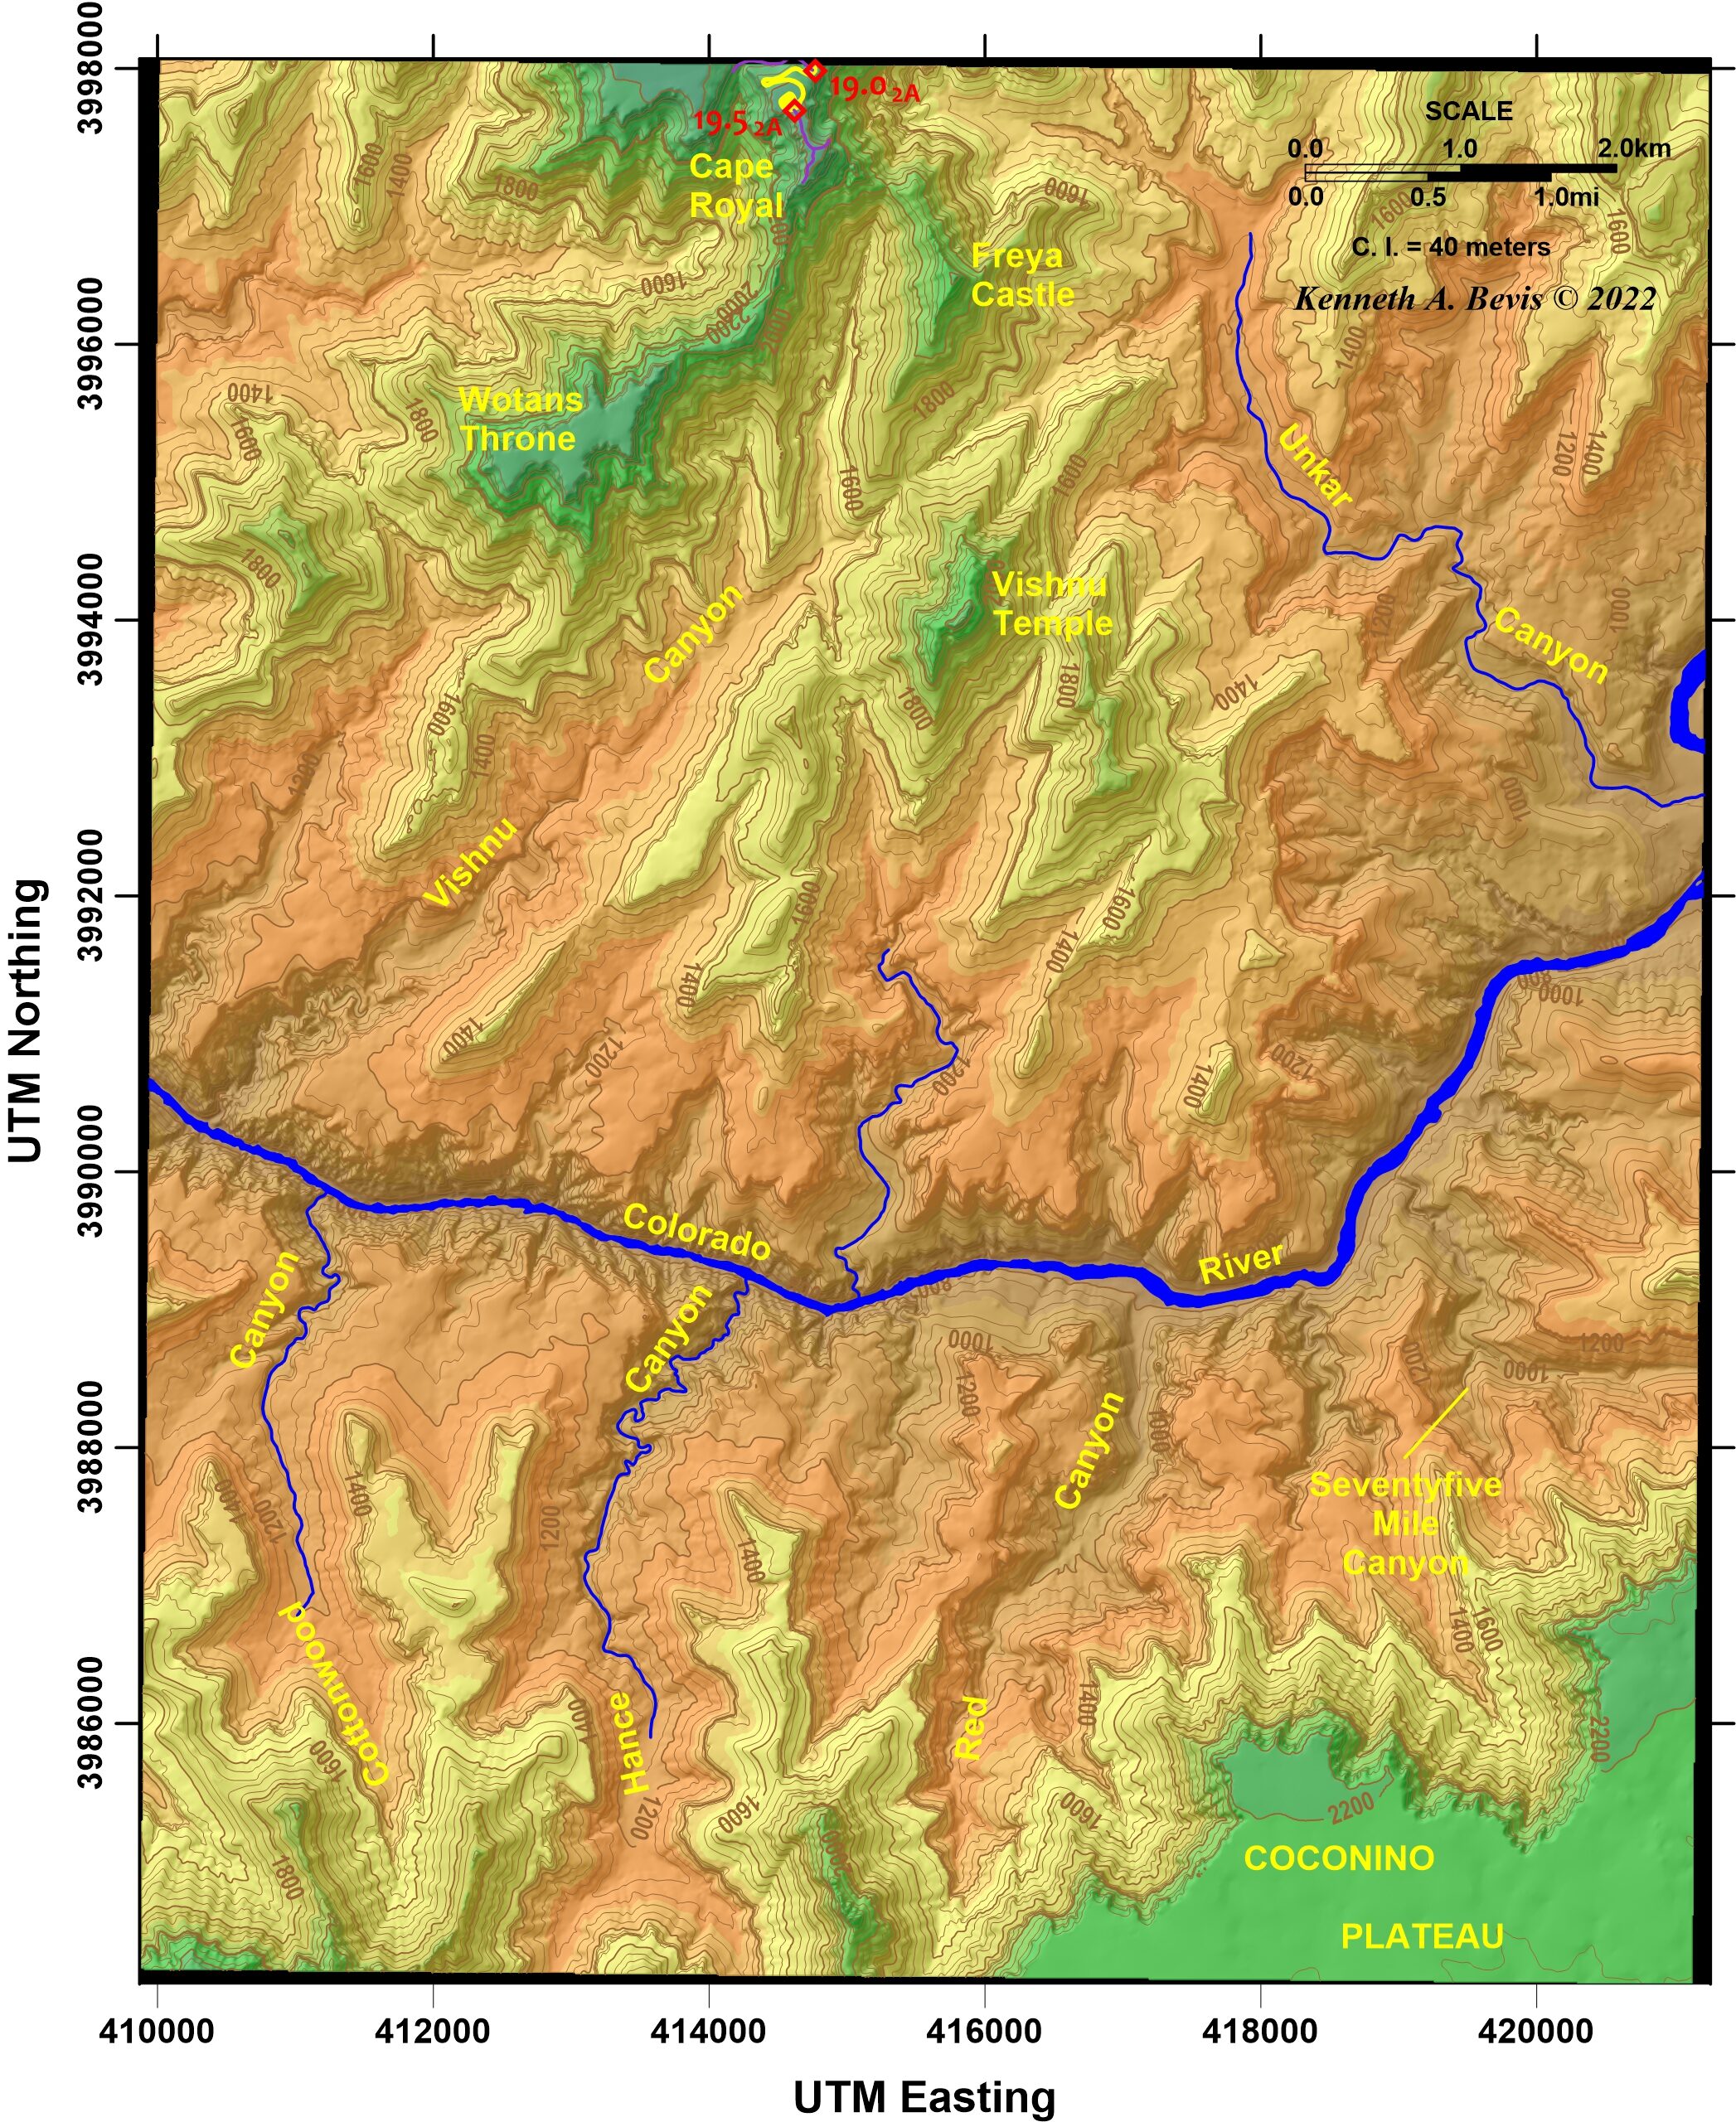 Color shaded-relief map of the Cape Royal, AZ 7.5 minute quadrangle showing a segment of Field Trip 2A.